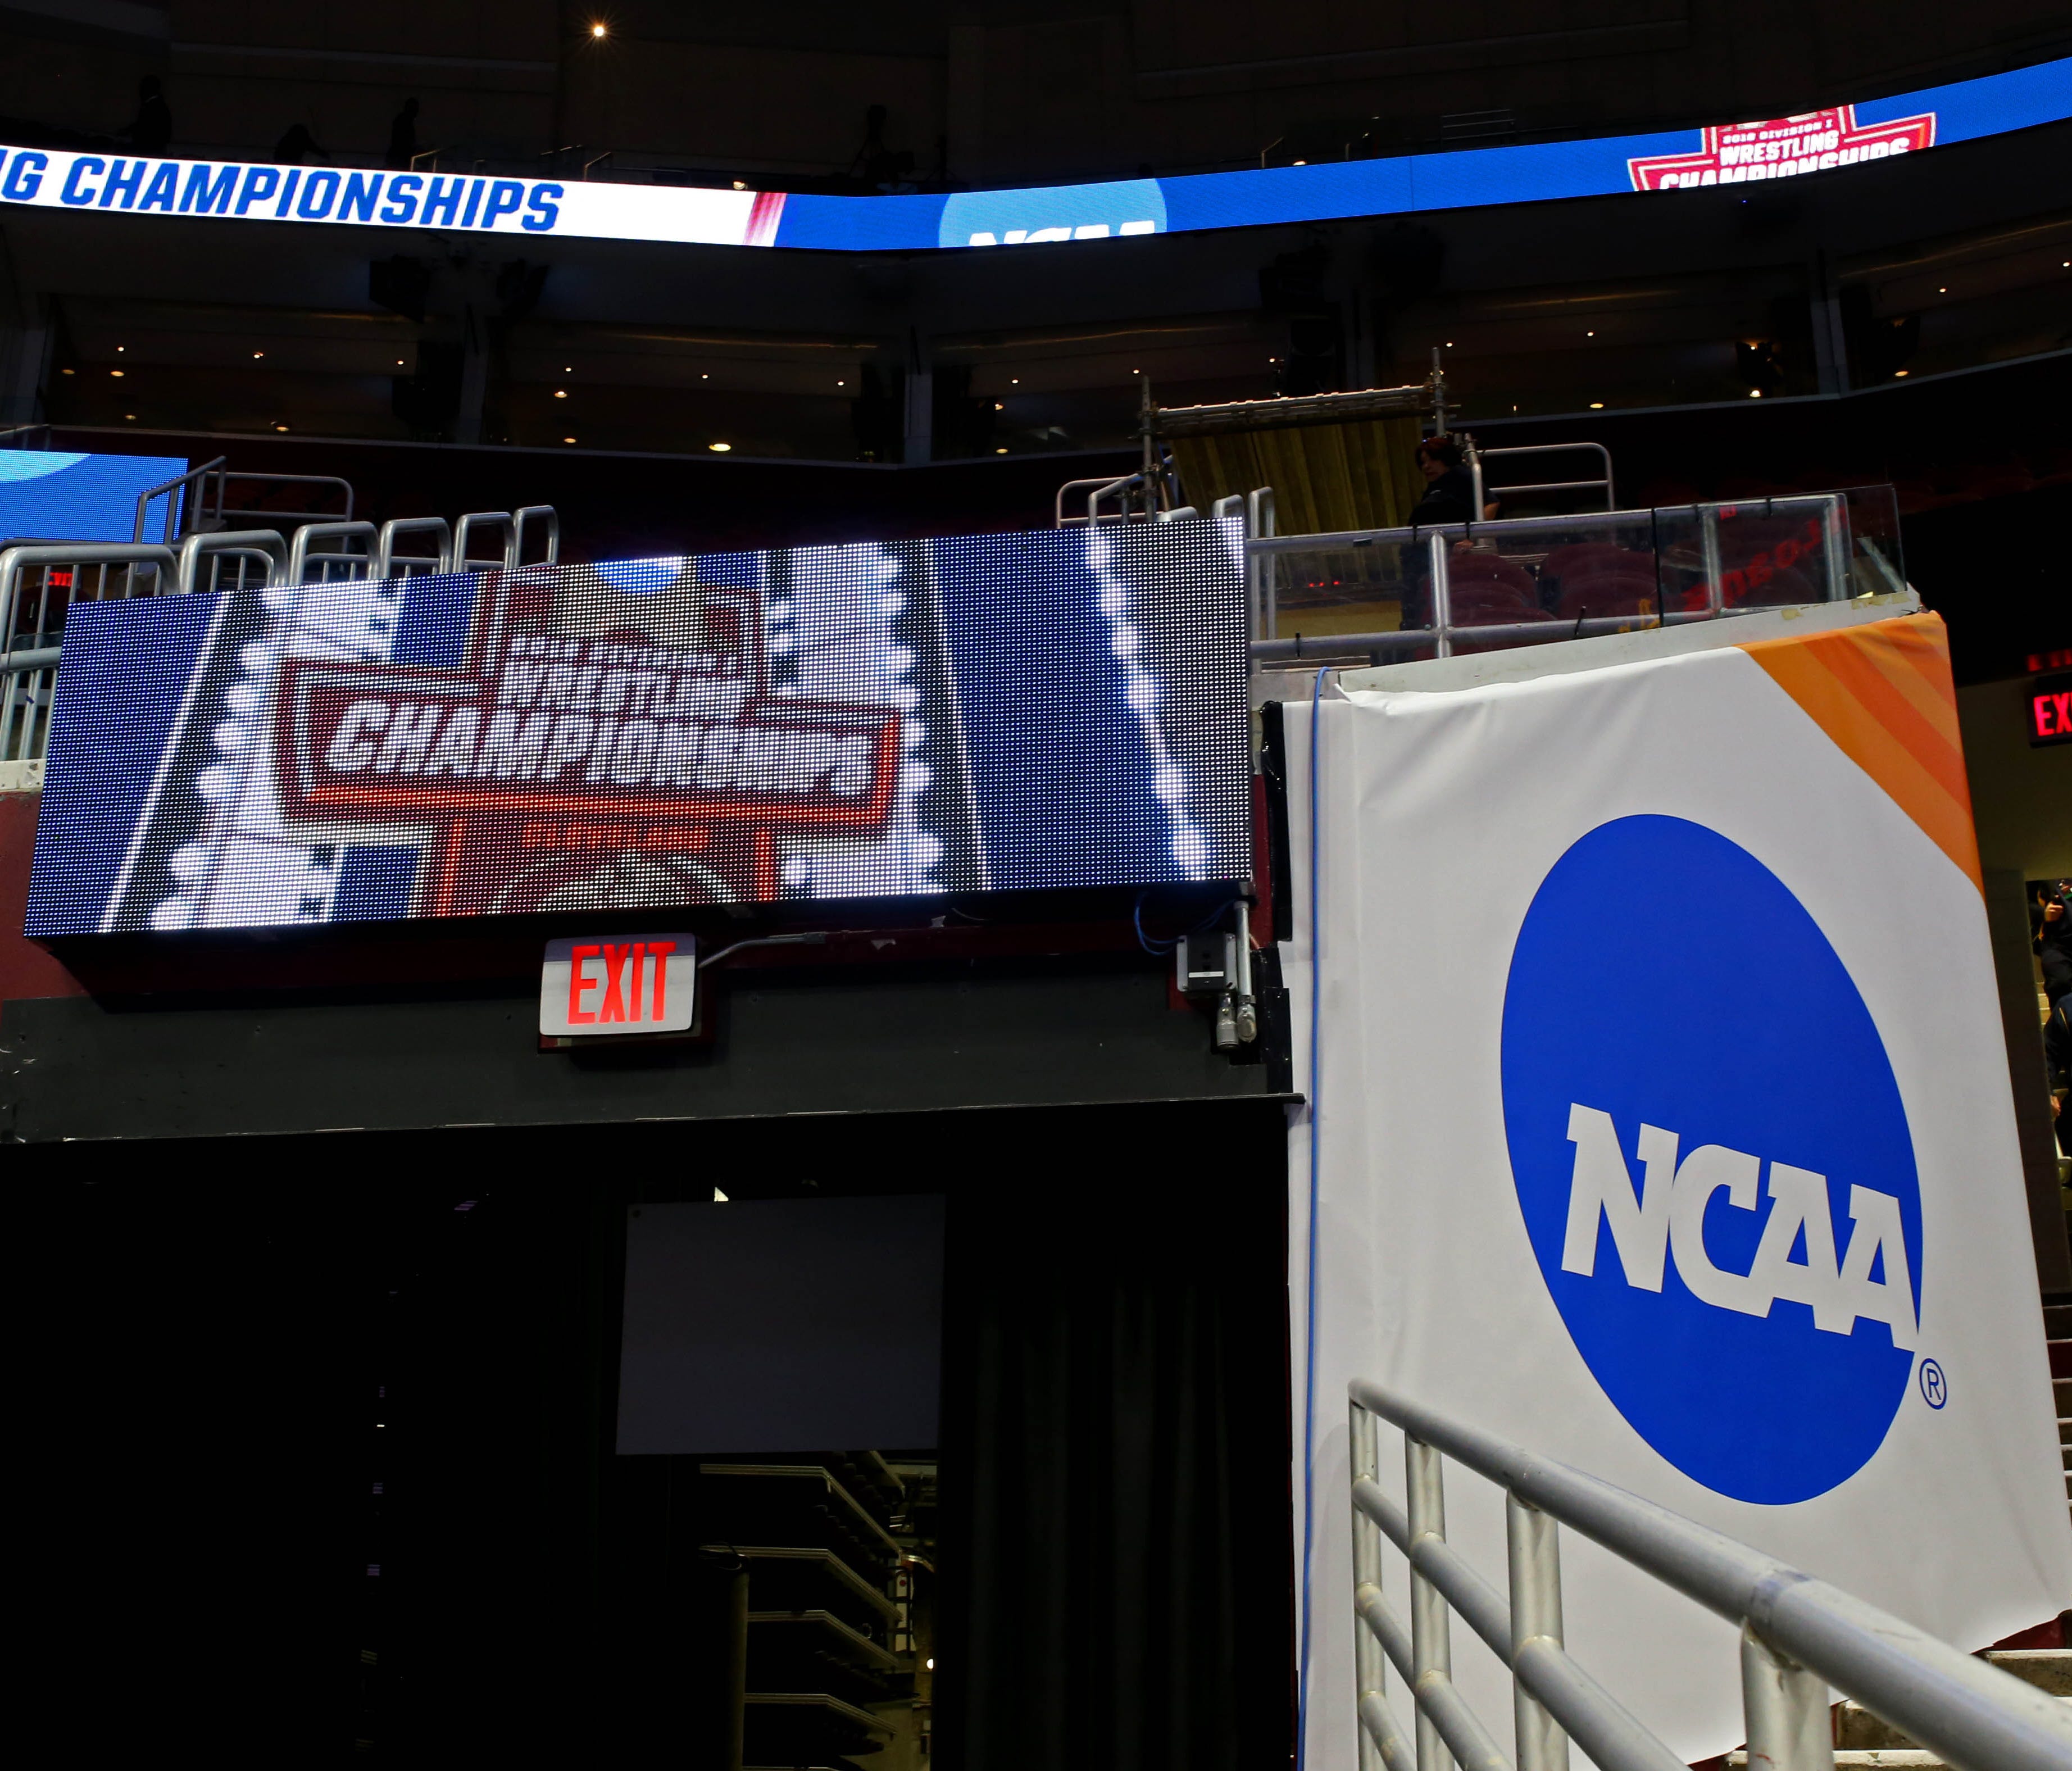 Mar 15, 2018; Cleveland, OH, USA; A view of the NCAA logo on a banner prior to session two in the NCAA Wrestling DI Wrestling Championships at Quicken Loans Arena. Mandatory Credit: Aaron Doster-USA TODAY Sports ORG XMIT: USATSI-379981 ORIG FILE ID: 